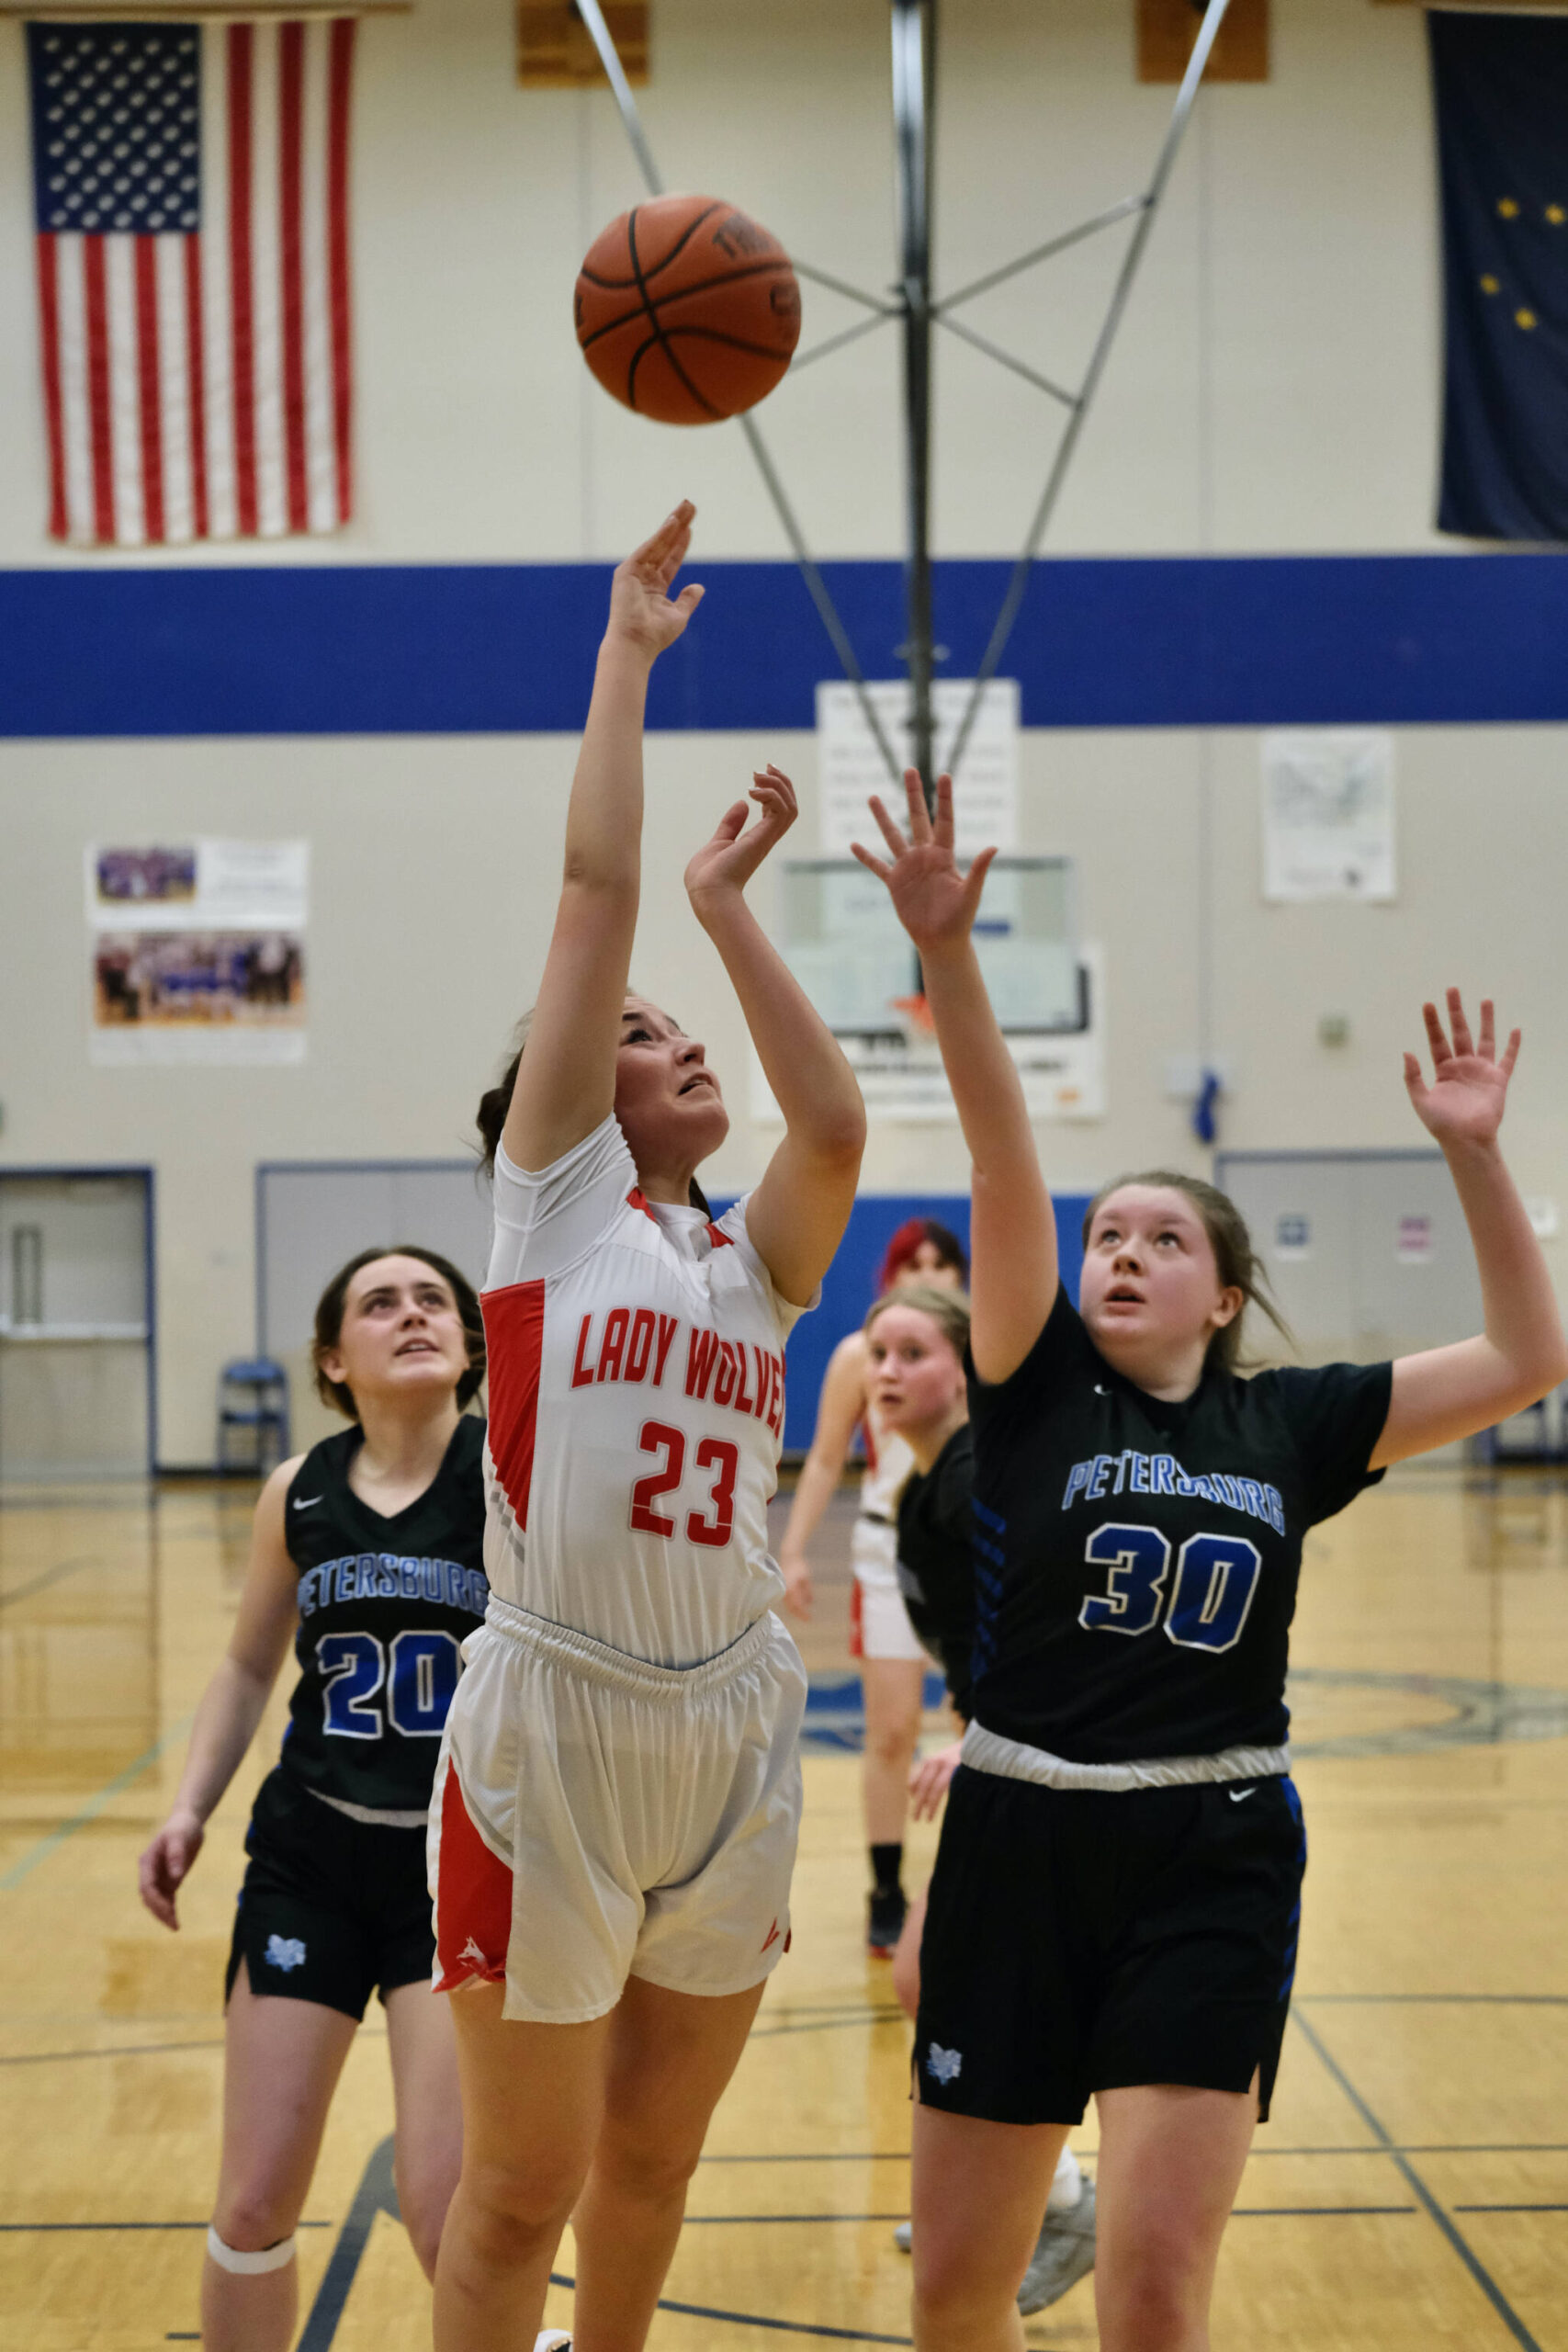 Wrangell High School junior Kayla Meissner (23) Petersburg High School sophomore Kylie Mattingly (30) during the Lady Wolves’ 48-10 win over the Lady Vikings in the Region V 2A/4A Basketball Tournament on Wednesday at Thunder Mountain High School in Juneau. (Klas Stolpe for the Juneau Empire)